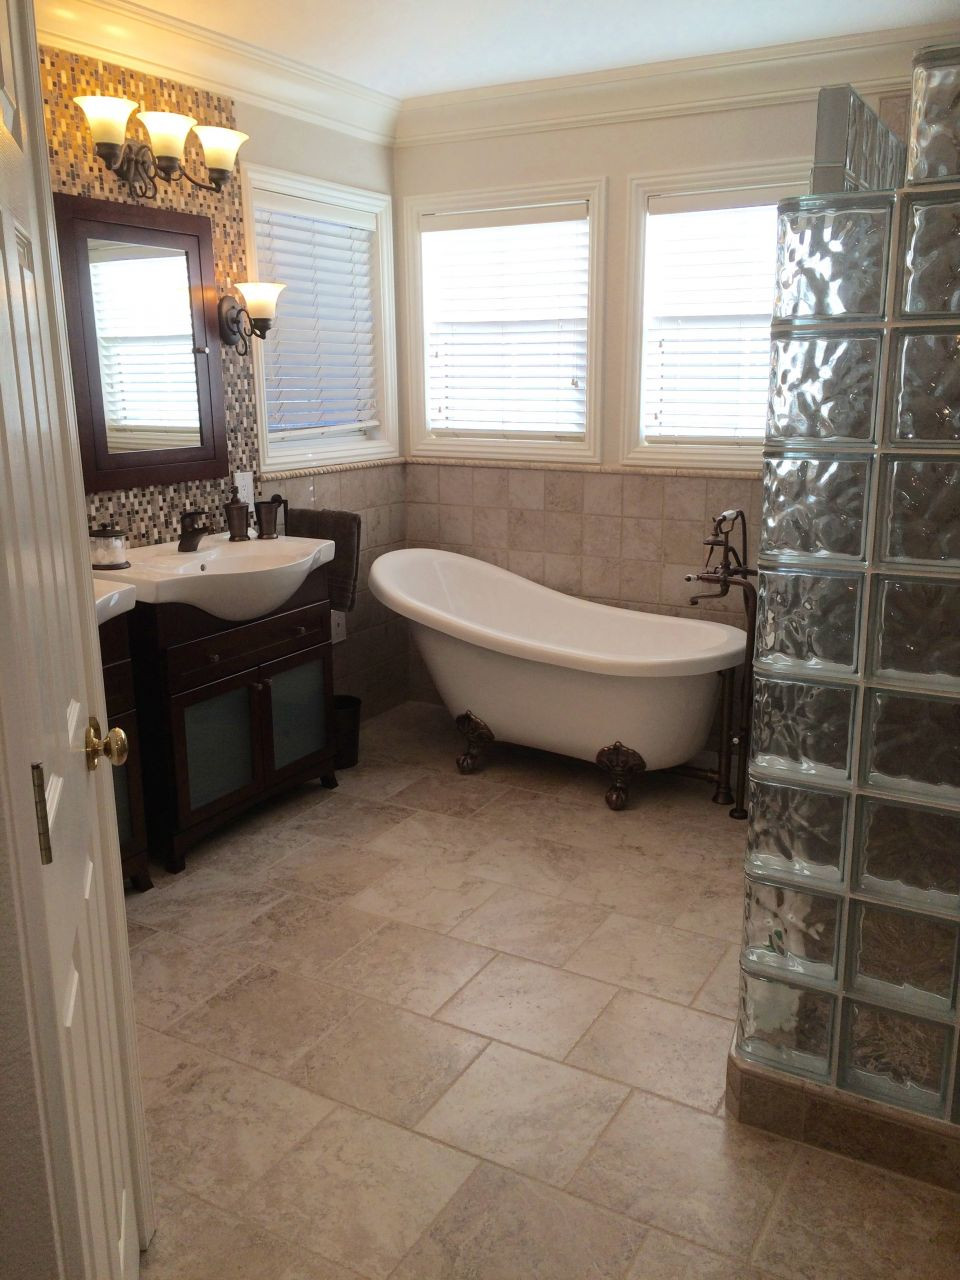 Master Bathroom Walk In Shower
 5 Out of the Box Remodeling Tips for a Master Bathroom in